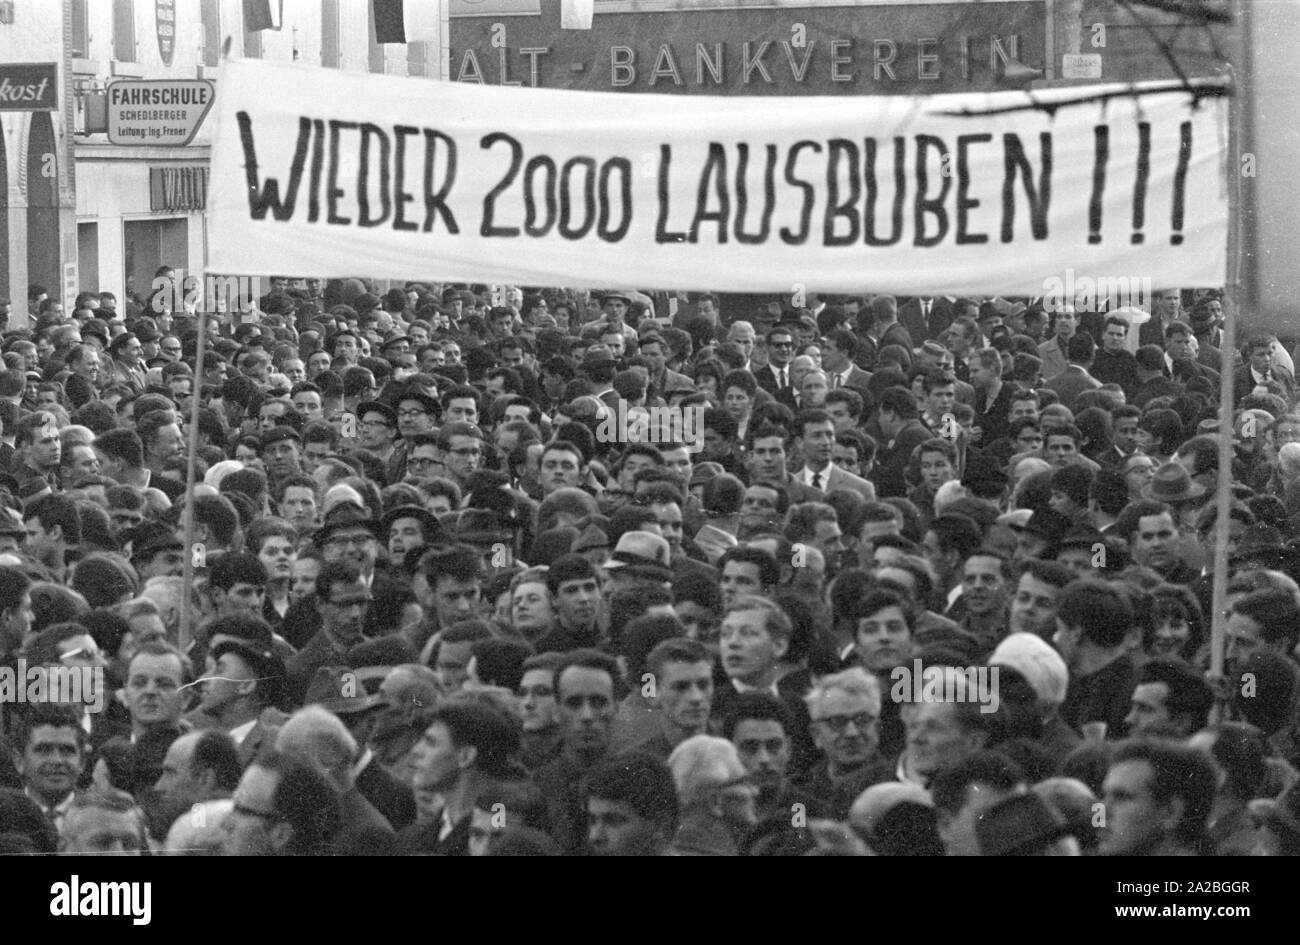 People demonstrate on the Kornmarktplatz in Bregenz, they want the newest ship of the Austrian Bodensee fleet to be named 'Vorarlberg'. The inhabitants of the homonymous federal state reject the ship name 'Karl Renner'. On the banner: 'Again 2000 rascals!!!'. This public debate, which lasted from 1964 to 1965, went down in history as the 'Fussachaffaere' ('Fussach affair'). Stock Photo